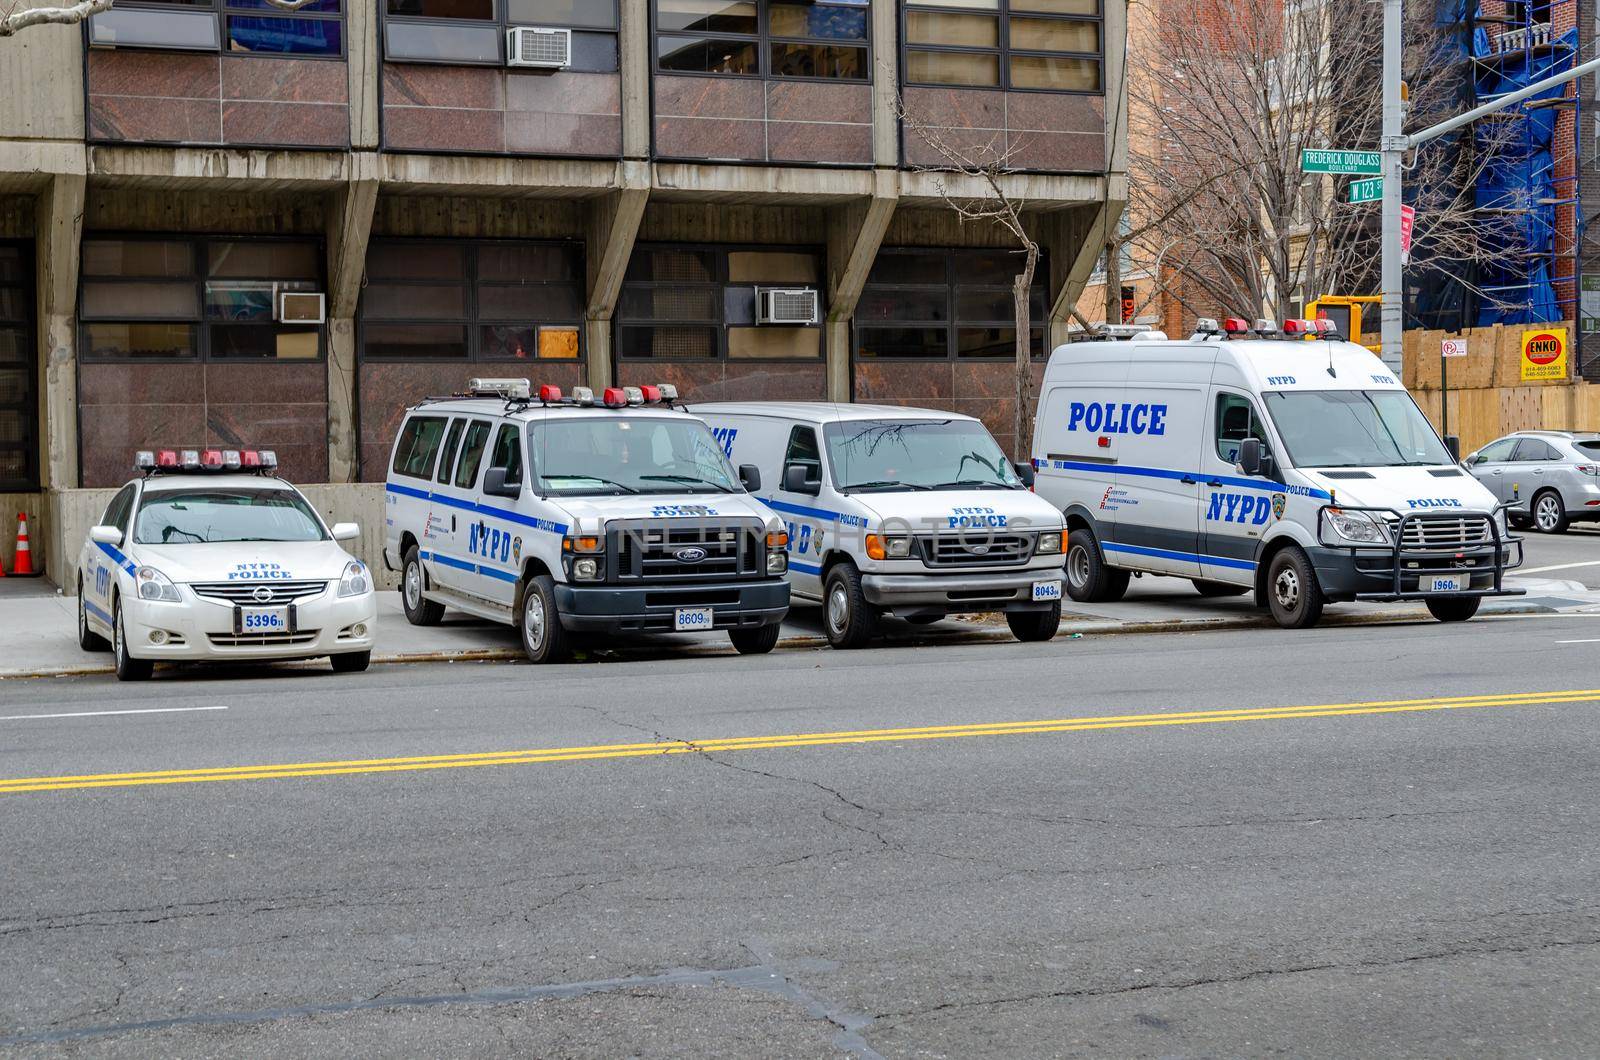 NYPD Different New York Police Department cars and trucks and van parked next to each other at a police station in Harlem next to the street, New York City, during winter day, horizontal